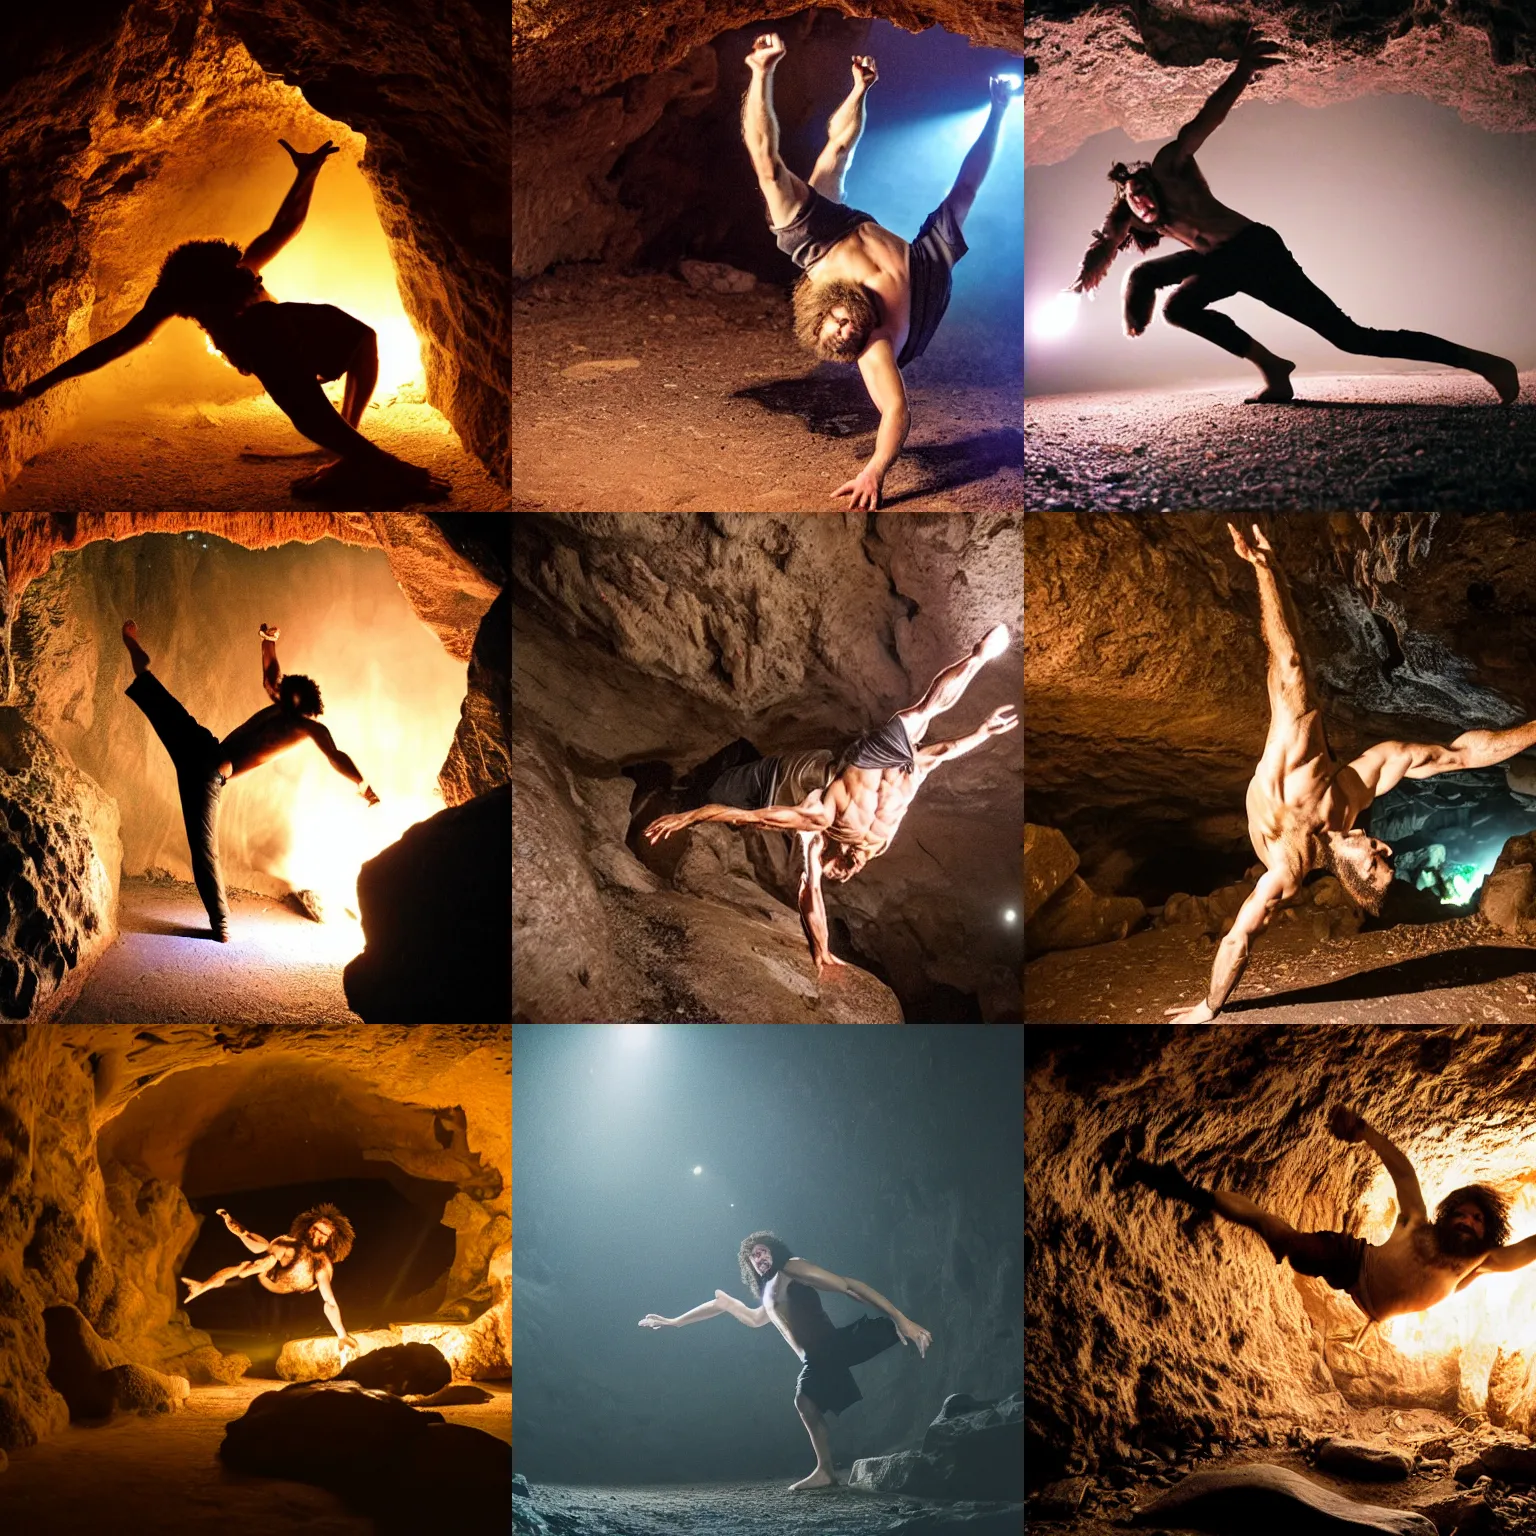 Prompt: a caveman breakdancing at night in a cave. The only light is from a fire.